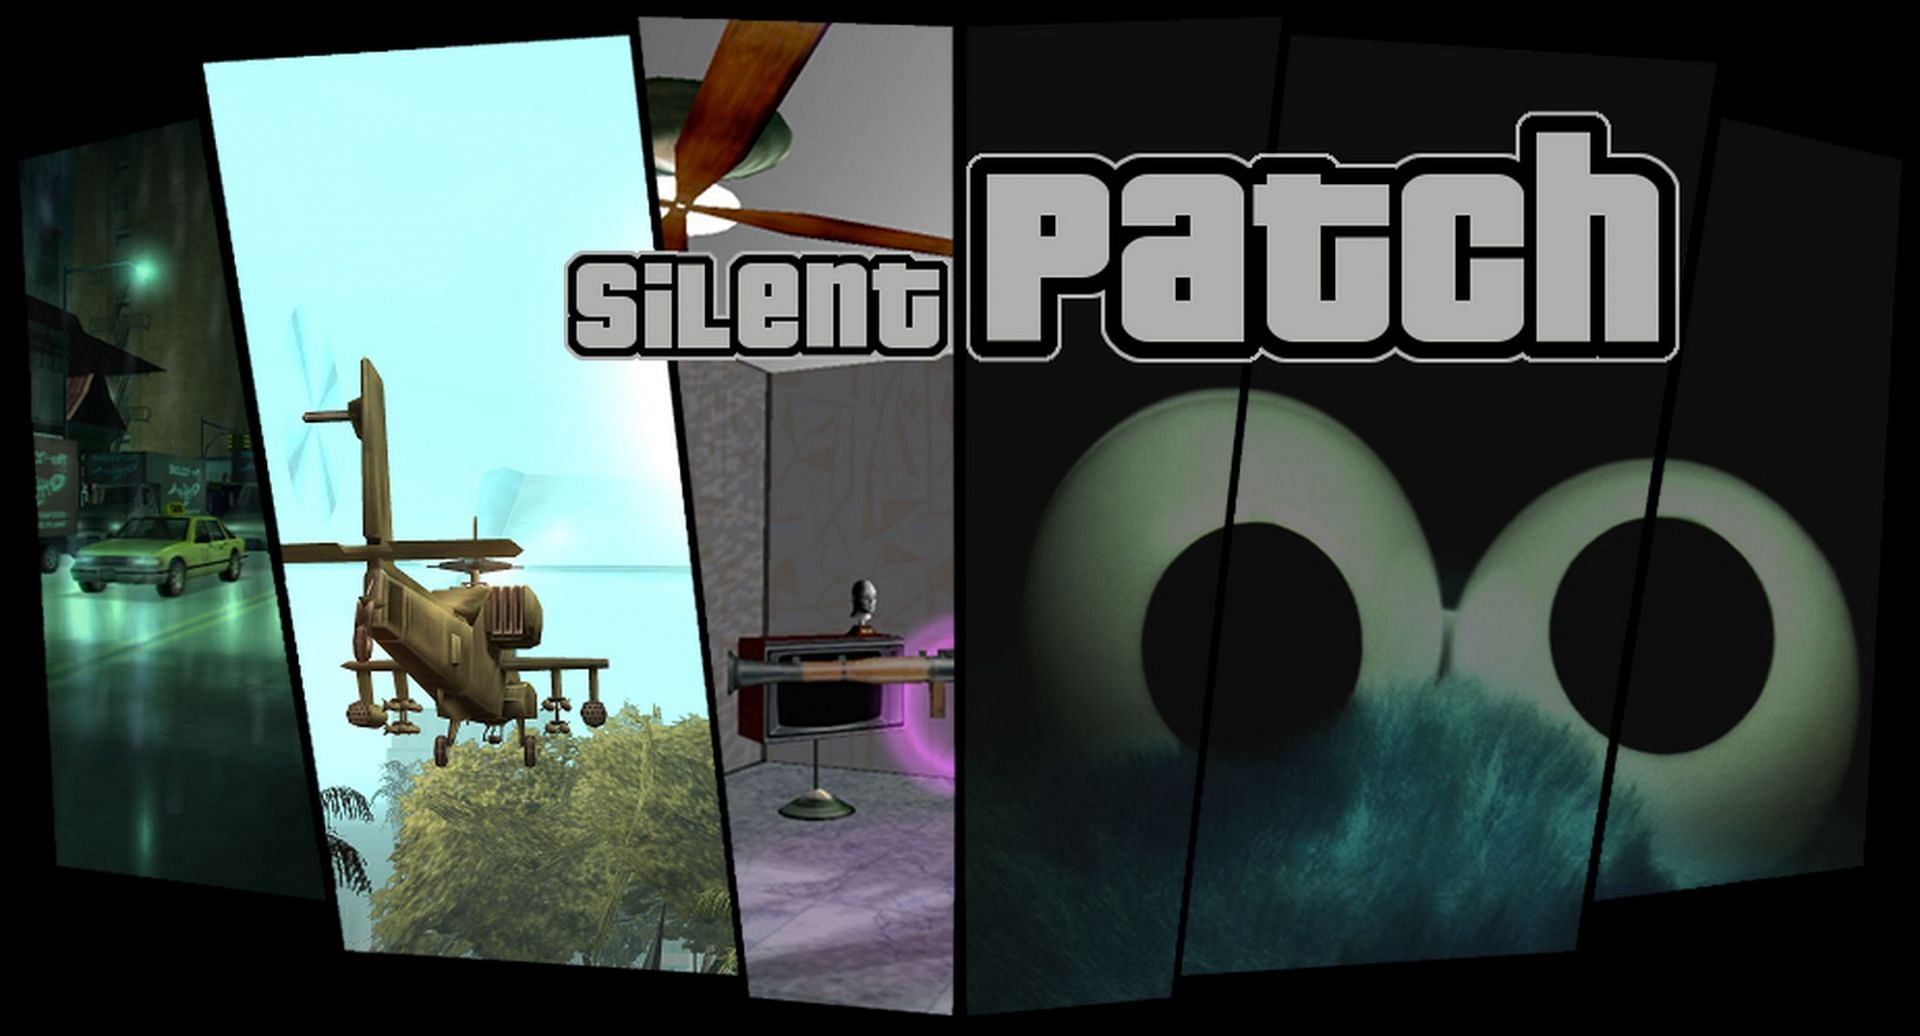 A photo associated with Silent Patch (Image via GTA forums)